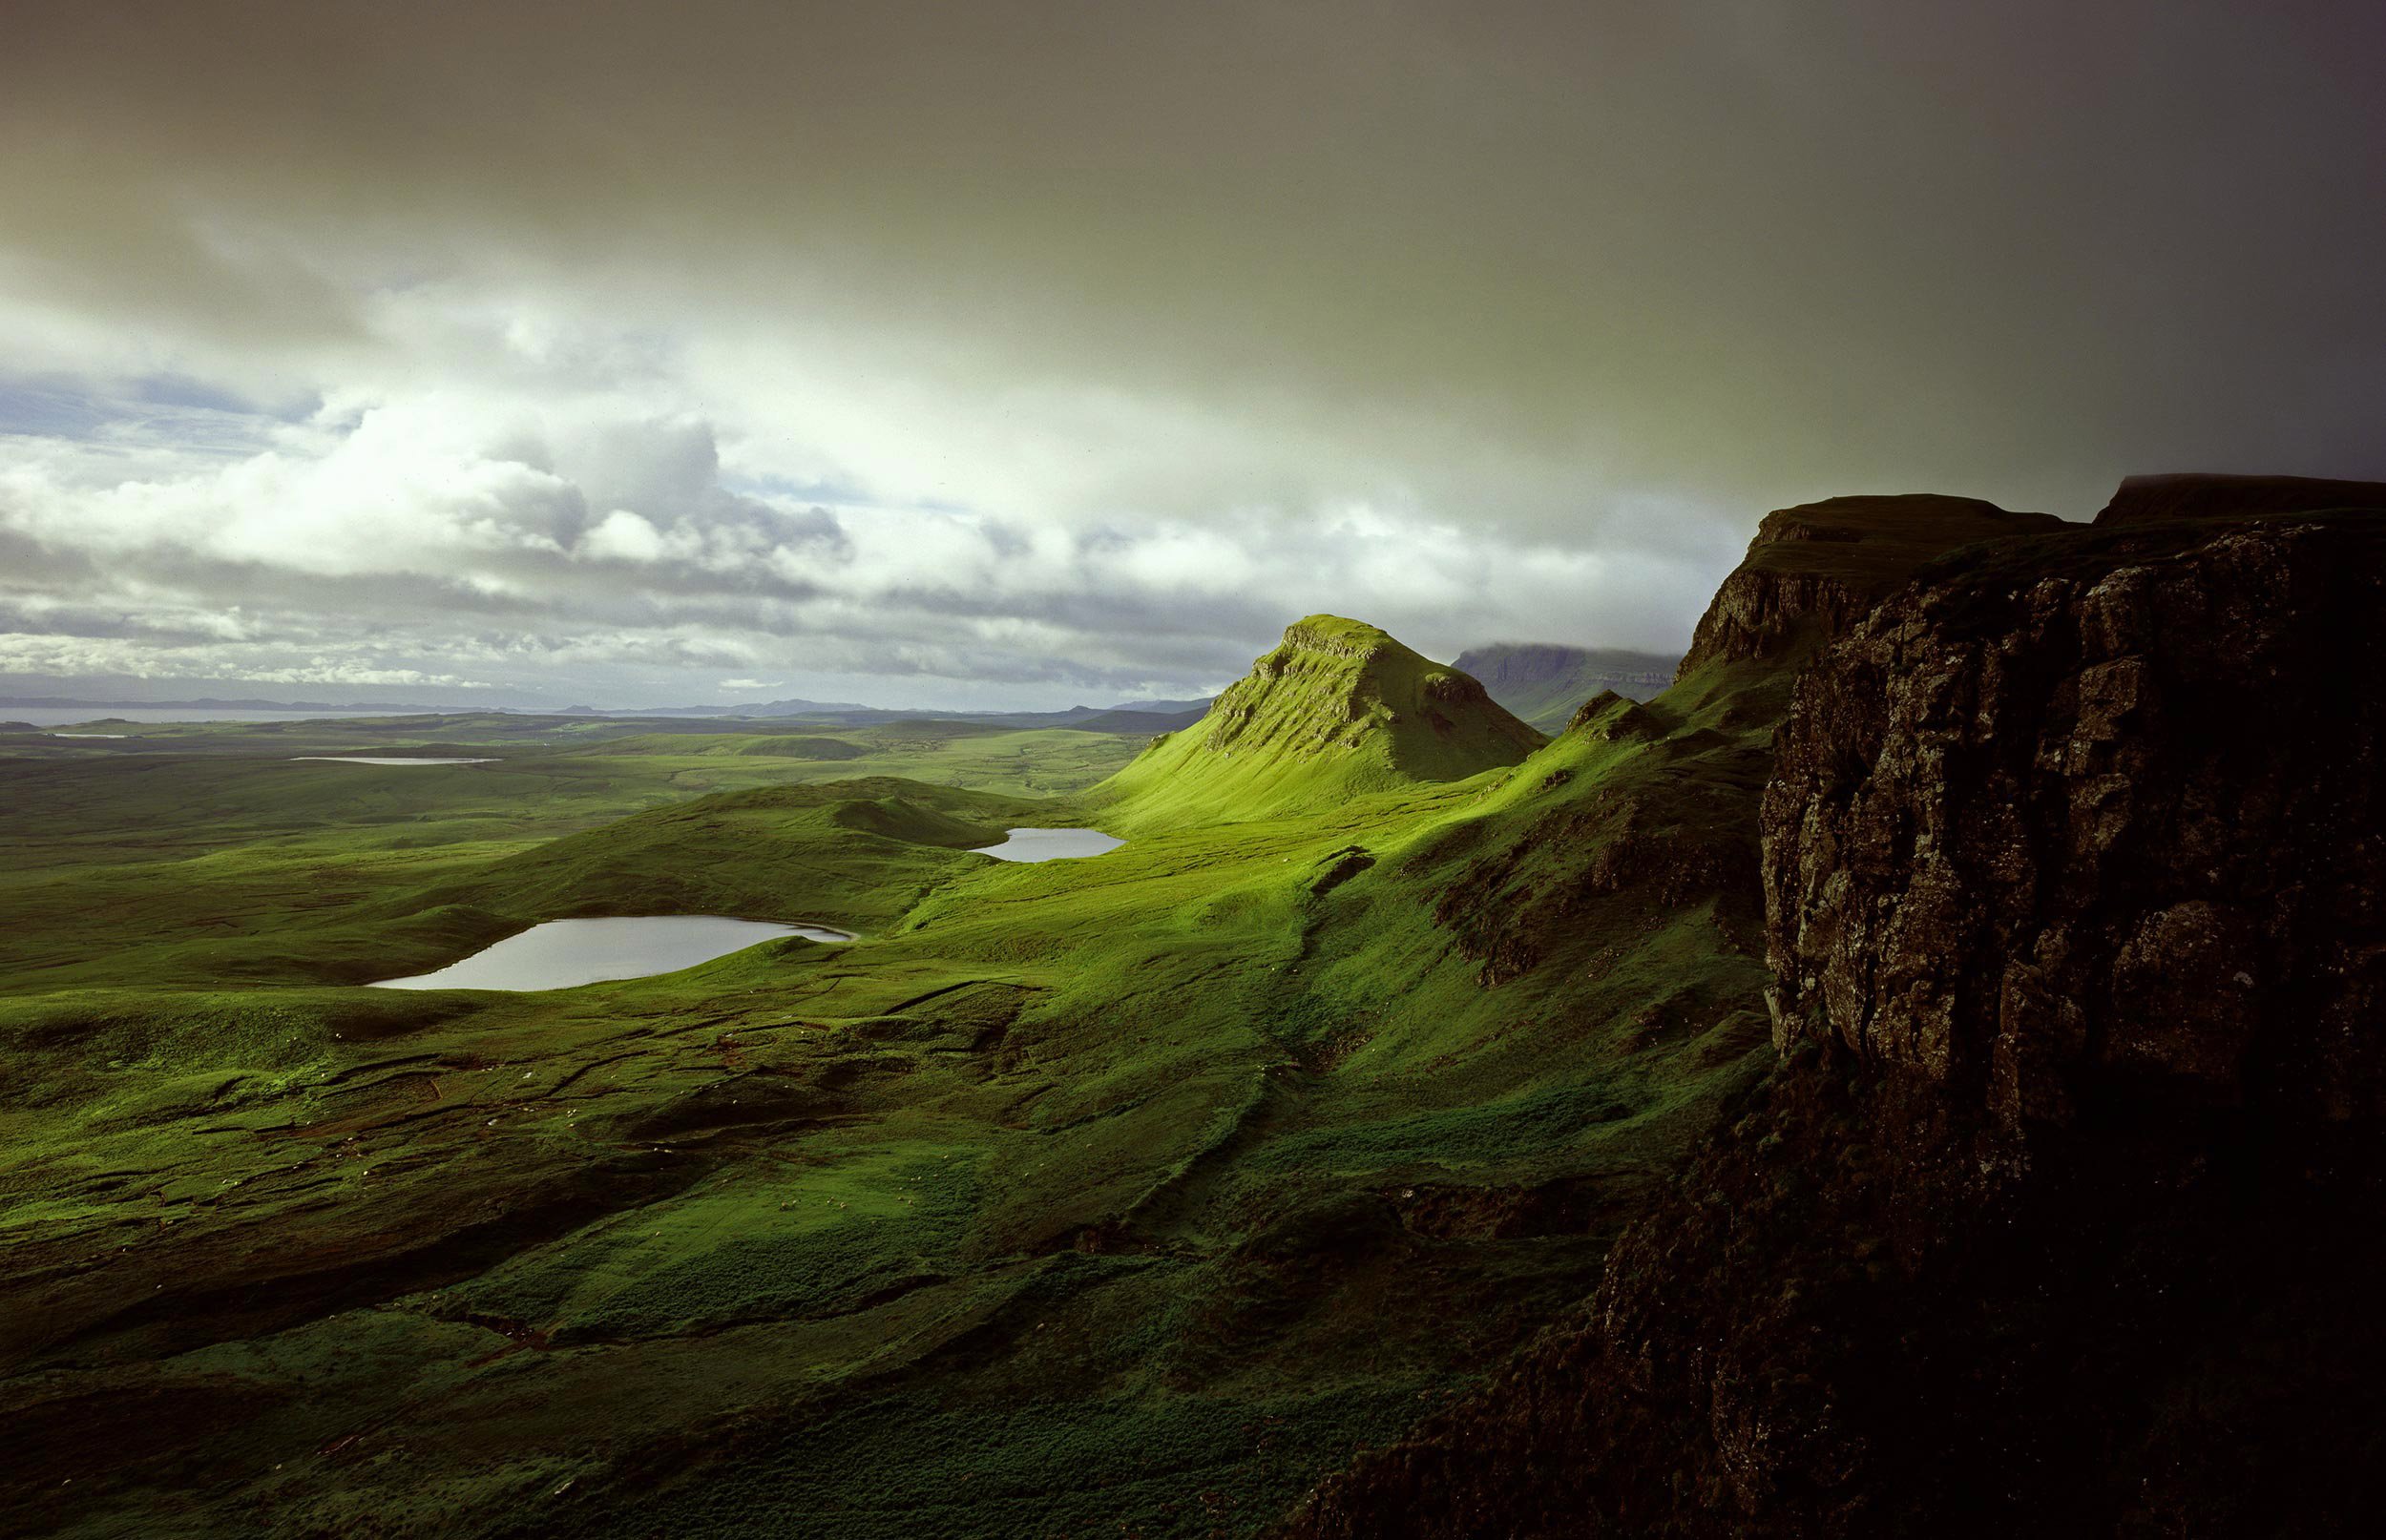 Skye, Scotland.  Landscape photography by Mike Caldwell